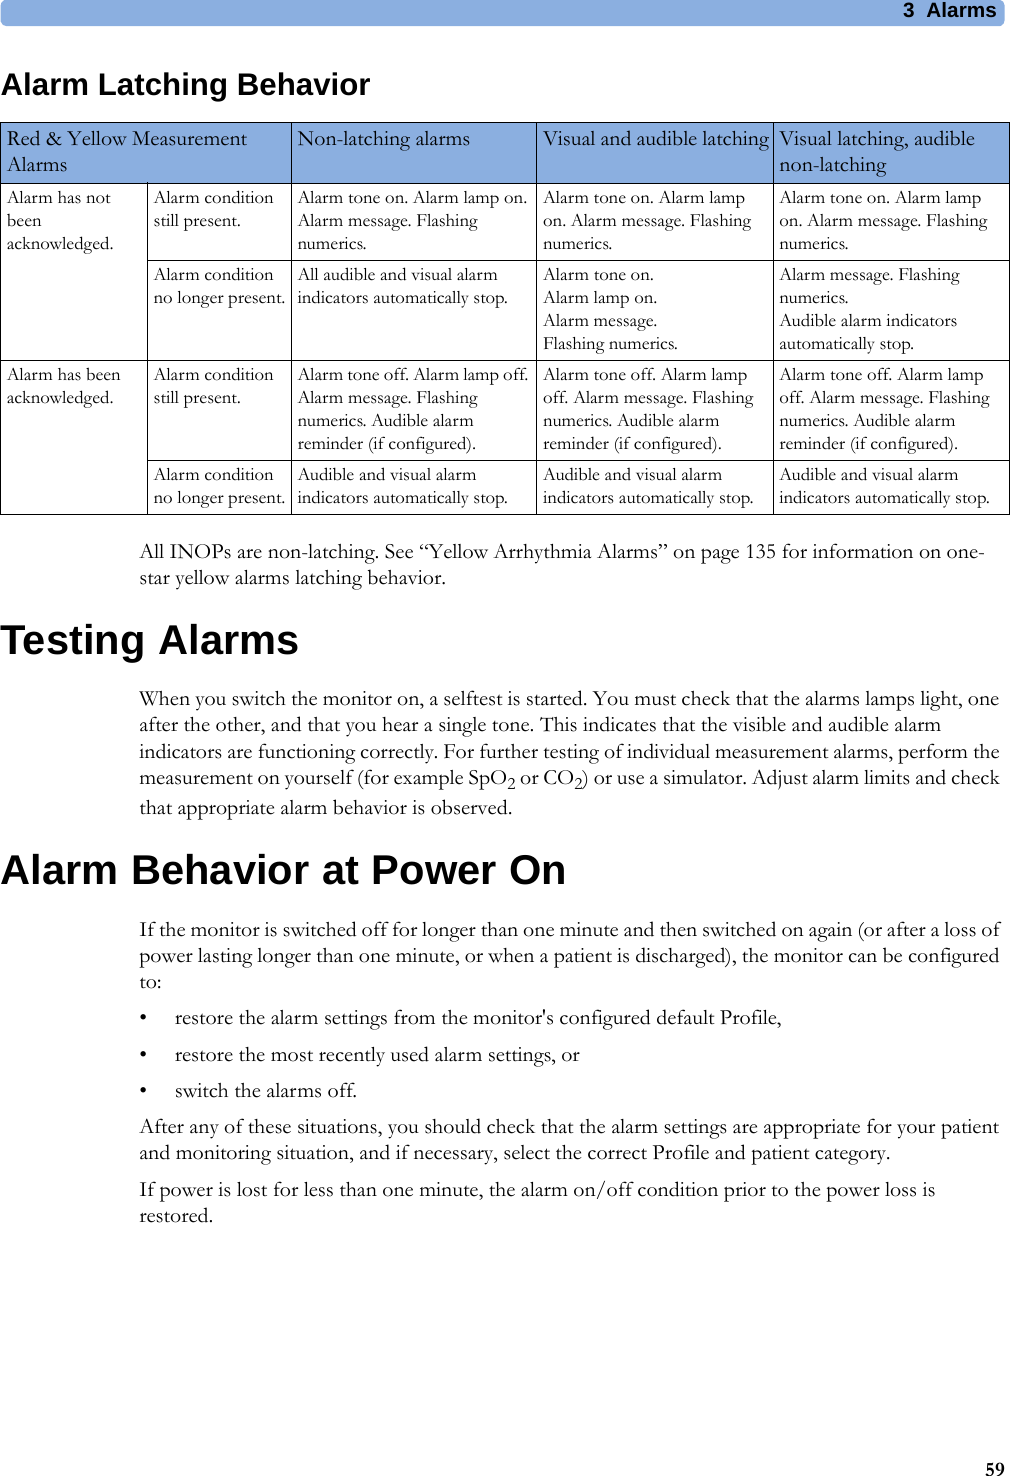 3 Alarms59Alarm Latching BehaviorAll INOPs are non-latching. See “Yellow Arrhythmia Alarms” on page 135 for information on one-star yellow alarms latching behavior.Testing AlarmsWhen you switch the monitor on, a selftest is started. You must check that the alarms lamps light, one after the other, and that you hear a single tone. This indicates that the visible and audible alarm indicators are functioning correctly. For further testing of individual measurement alarms, perform the measurement on yourself (for example SpO2 or CO2) or use a simulator. Adjust alarm limits and check that appropriate alarm behavior is observed.Alarm Behavior at Power OnIf the monitor is switched off for longer than one minute and then switched on again (or after a loss of power lasting longer than one minute, or when a patient is discharged), the monitor can be configured to:• restore the alarm settings from the monitor&apos;s configured default Profile,• restore the most recently used alarm settings, or • switch the alarms off. After any of these situations, you should check that the alarm settings are appropriate for your patient and monitoring situation, and if necessary, select the correct Profile and patient category.If power is lost for less than one minute, the alarm on/off condition prior to the power loss is restored.Red &amp; Yellow Measurement AlarmsNon-latching alarms Visual and audible latching Visual latching, audible non-latchingAlarm has not been acknowledged.Alarm condition still present.Alarm tone on. Alarm lamp on. Alarm message. Flashing numerics.Alarm tone on. Alarm lamp on. Alarm message. Flashing numerics.Alarm tone on. Alarm lamp on. Alarm message. Flashing numerics.Alarm condition no longer present.All audible and visual alarm indicators automatically stop.Alarm tone on.Alarm lamp on. Alarm message. Flashing numerics.Alarm message. Flashing numerics.Audible alarm indicators automatically stop.Alarm has been acknowledged.Alarm condition still present.Alarm tone off. Alarm lamp off. Alarm message. Flashing numerics. Audible alarm reminder (if configured).Alarm tone off. Alarm lamp off. Alarm message. Flashing numerics. Audible alarm reminder (if configured).Alarm tone off. Alarm lamp off. Alarm message. Flashing numerics. Audible alarm reminder (if configured).Alarm condition no longer present.Audible and visual alarm indicators automatically stop.Audible and visual alarm indicators automatically stop.Audible and visual alarm indicators automatically stop.